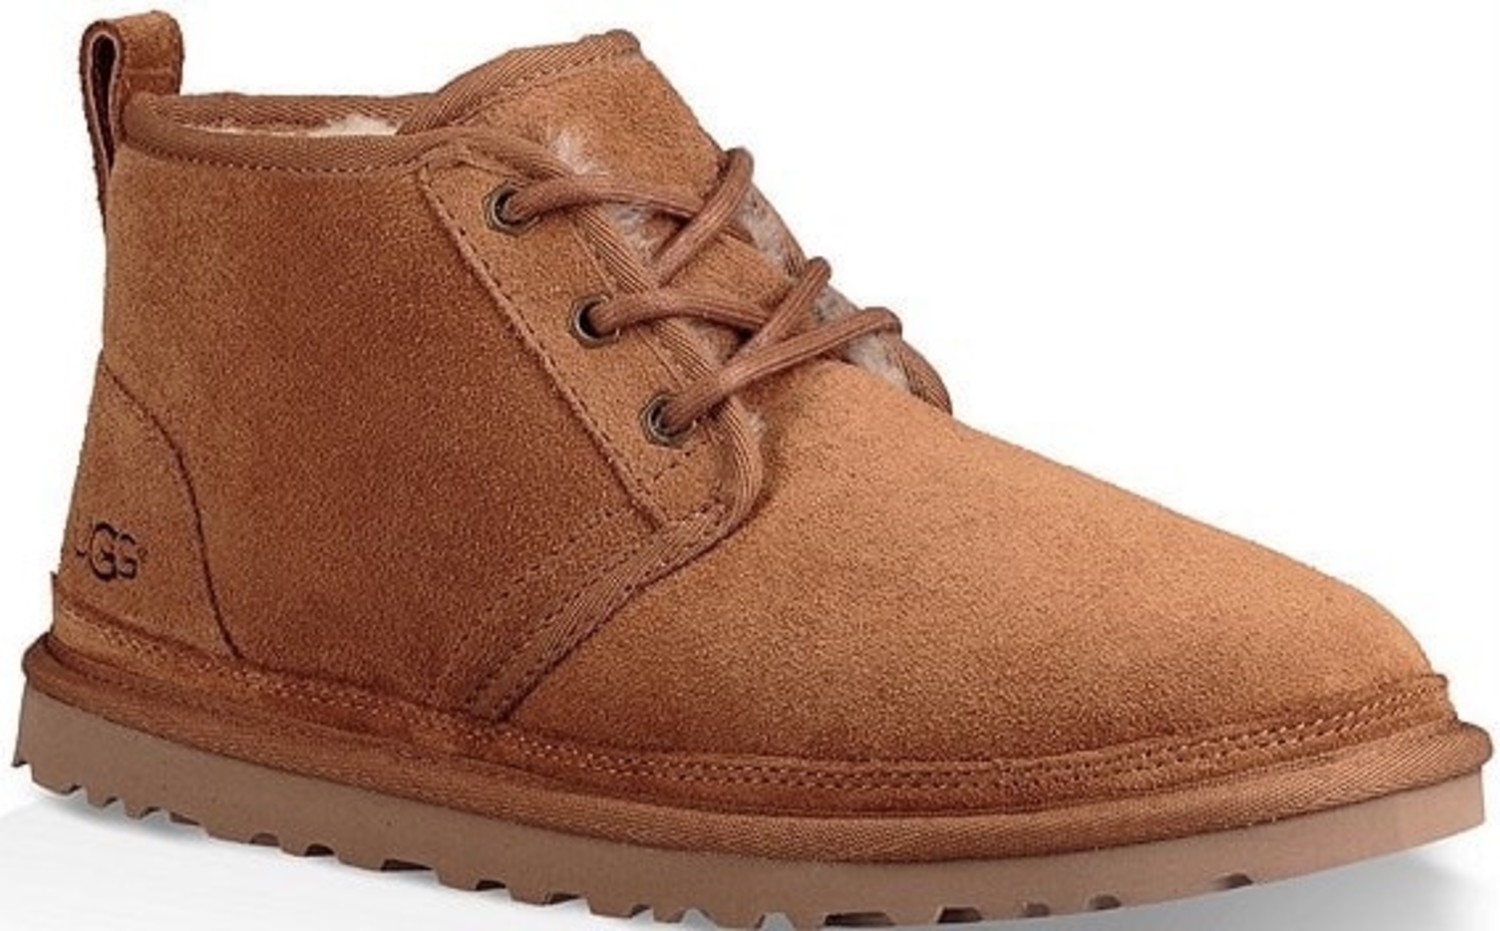 UGG Women's Neumel Chestnut Suede Boot - Continental Shoes